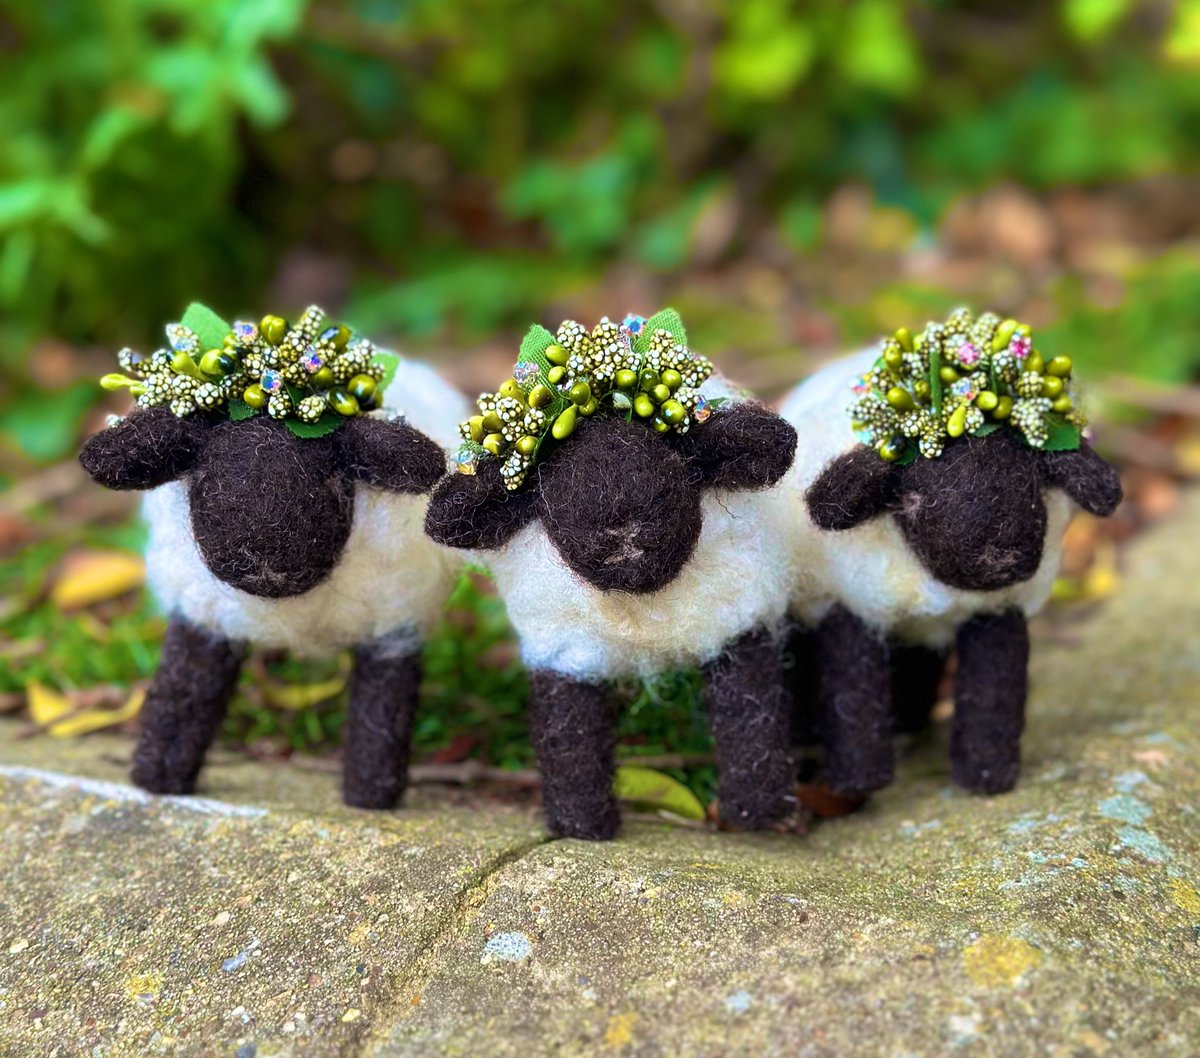 Sheep are always happier in flocks 🥹 Just look at these little ones heading off together to Canada today! 🇨🇦 Did you know we ship worldwide? 🌍✨ Every order helps our animal sanctuary! Please shop with us here: minimotleysanctuary.etsy.com 💚 #MHHSBD #shopindie #shopsmall